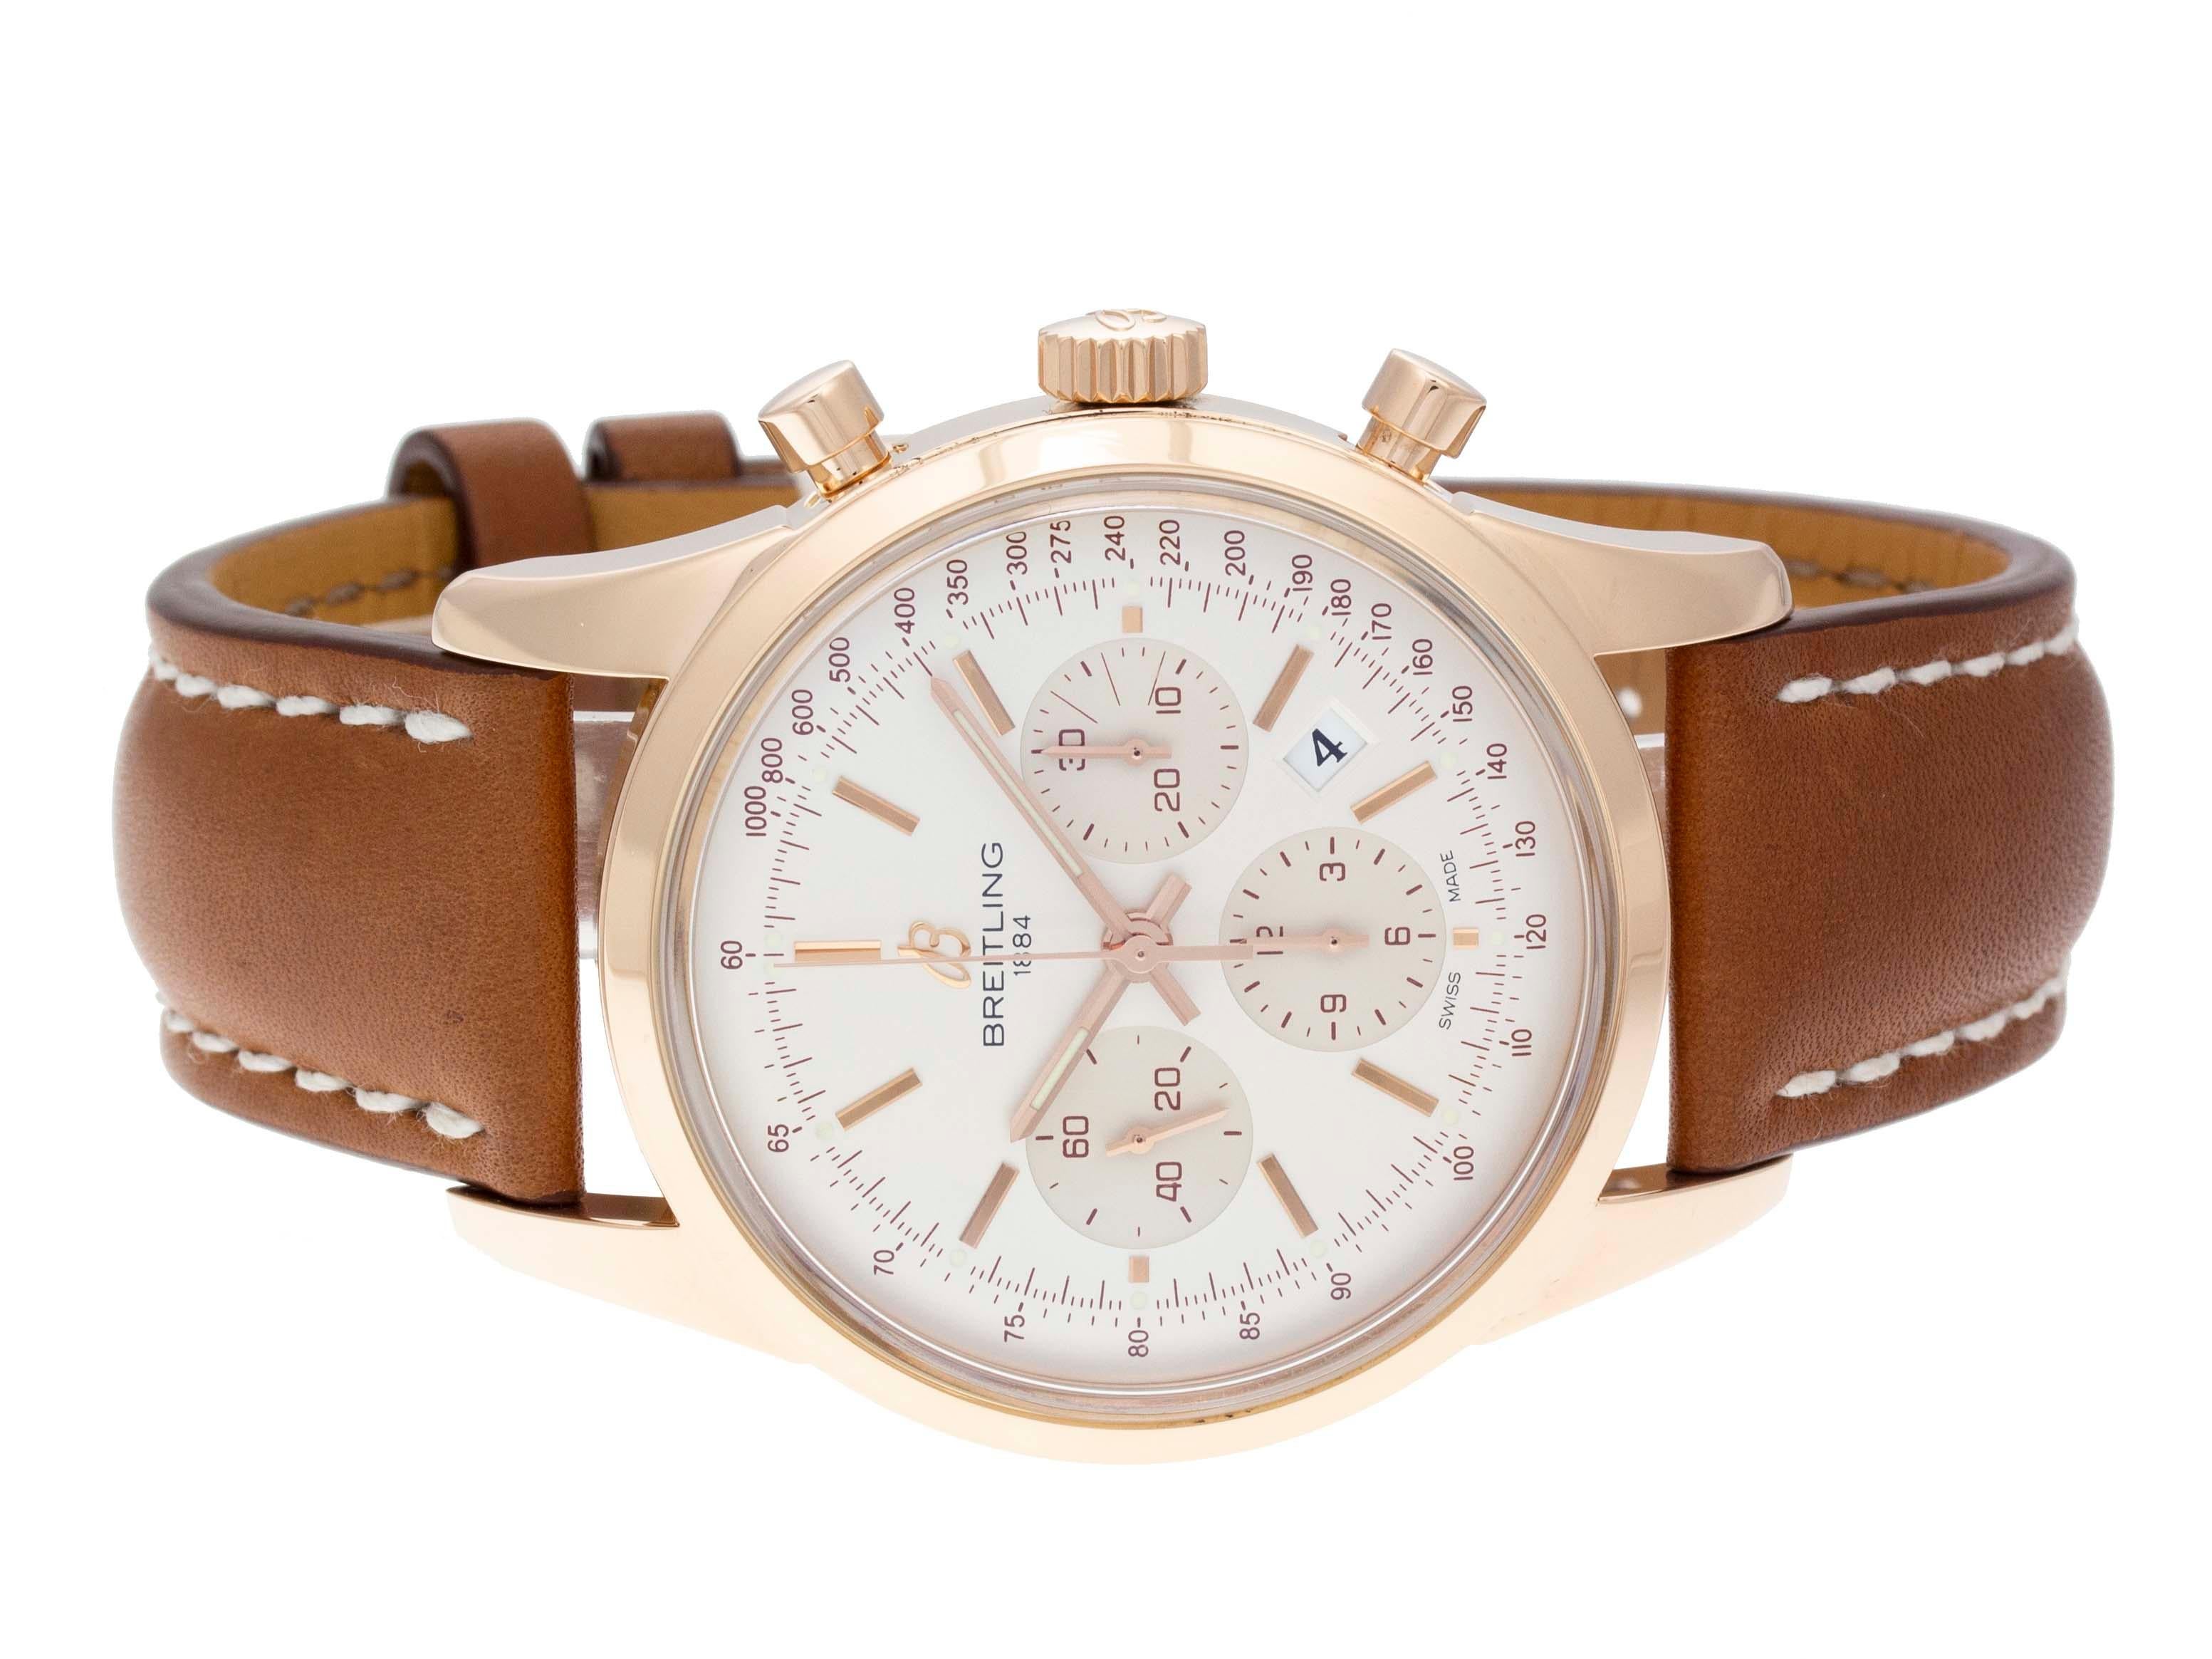 Brand	Breitling
Series	Transocean Chronograph 43
Model	RB015212/G738
Gender	Men's
Condition	Excellent Display
Material	18k Rose Gold
Finish	Polished
Caseback	Transparent
Diameter	43mm
Thickness	14.35mm
Crystal	Sapphire Scratch Resistant
Crown	Push /